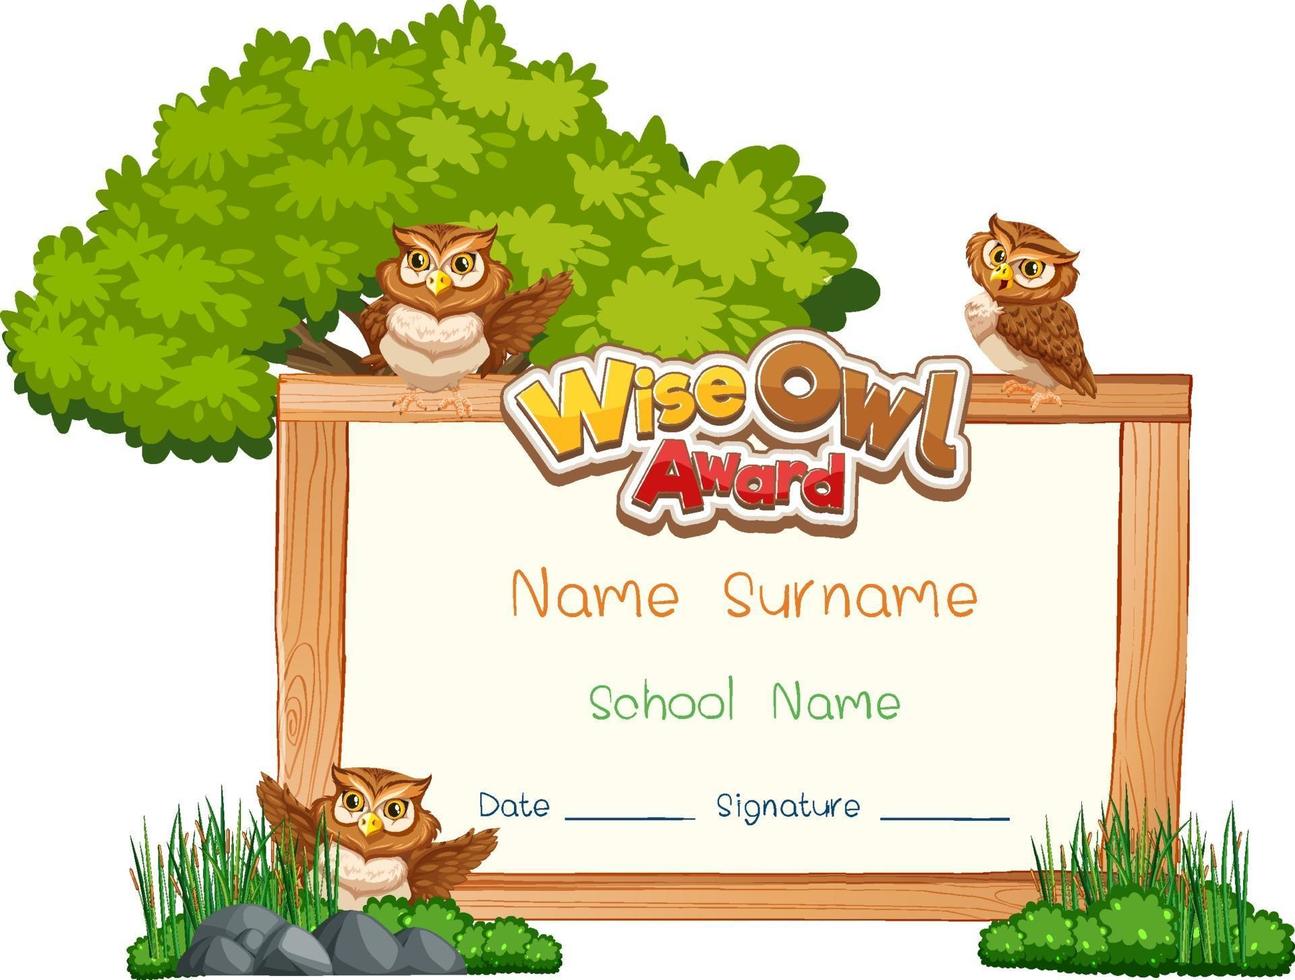 Diploma or certificate template for school kids vector